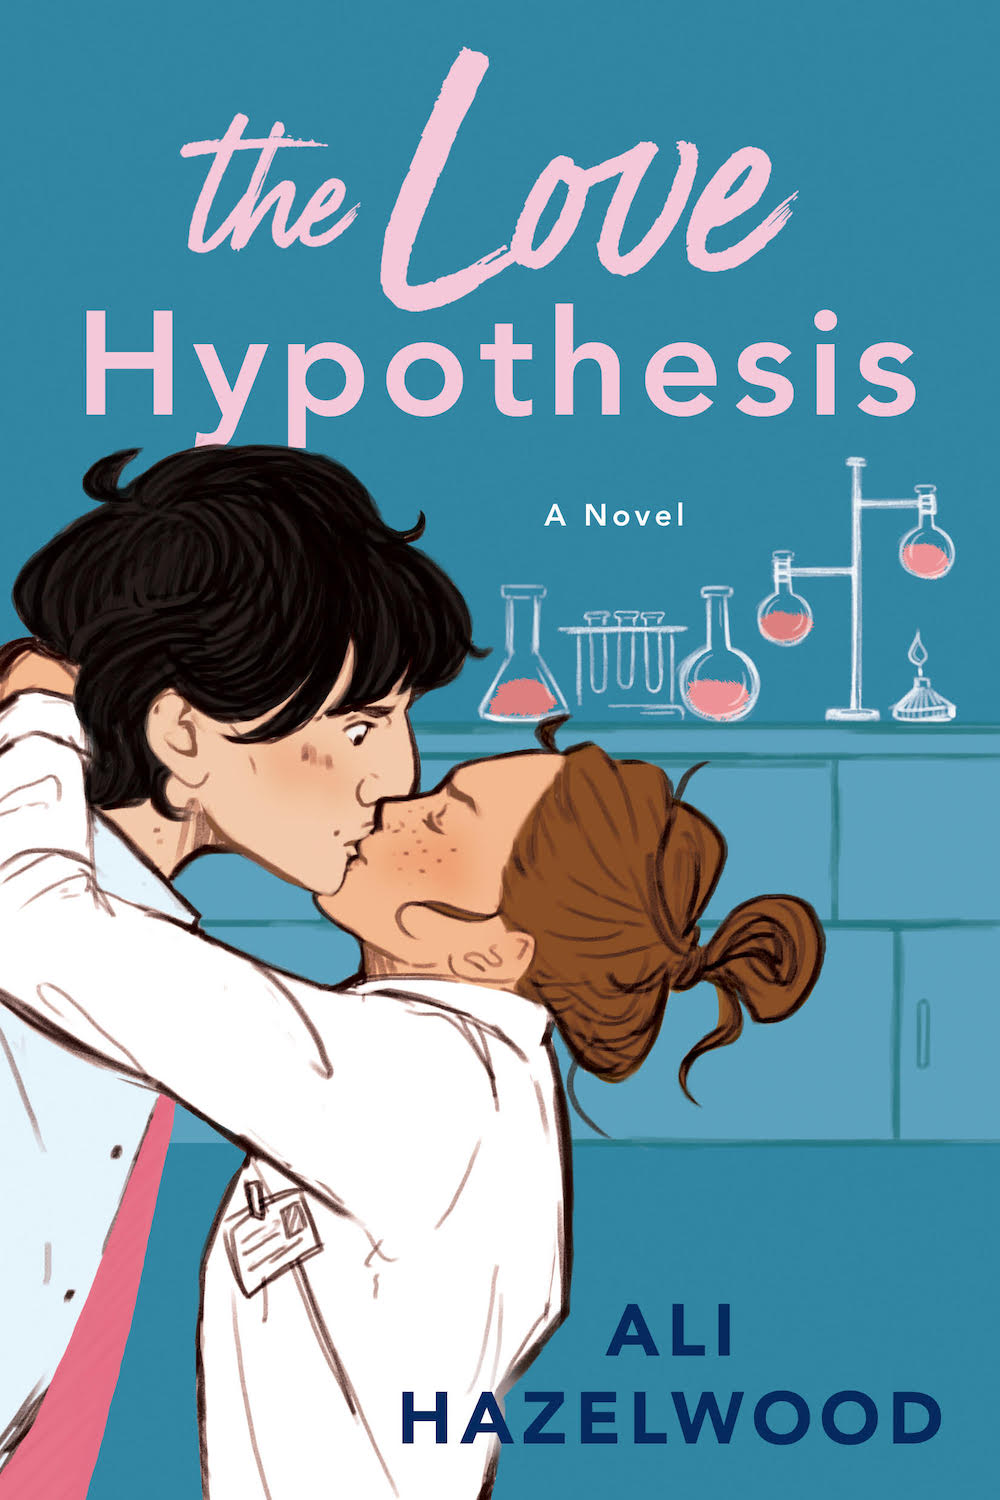 is the love hypothesis 3rd person